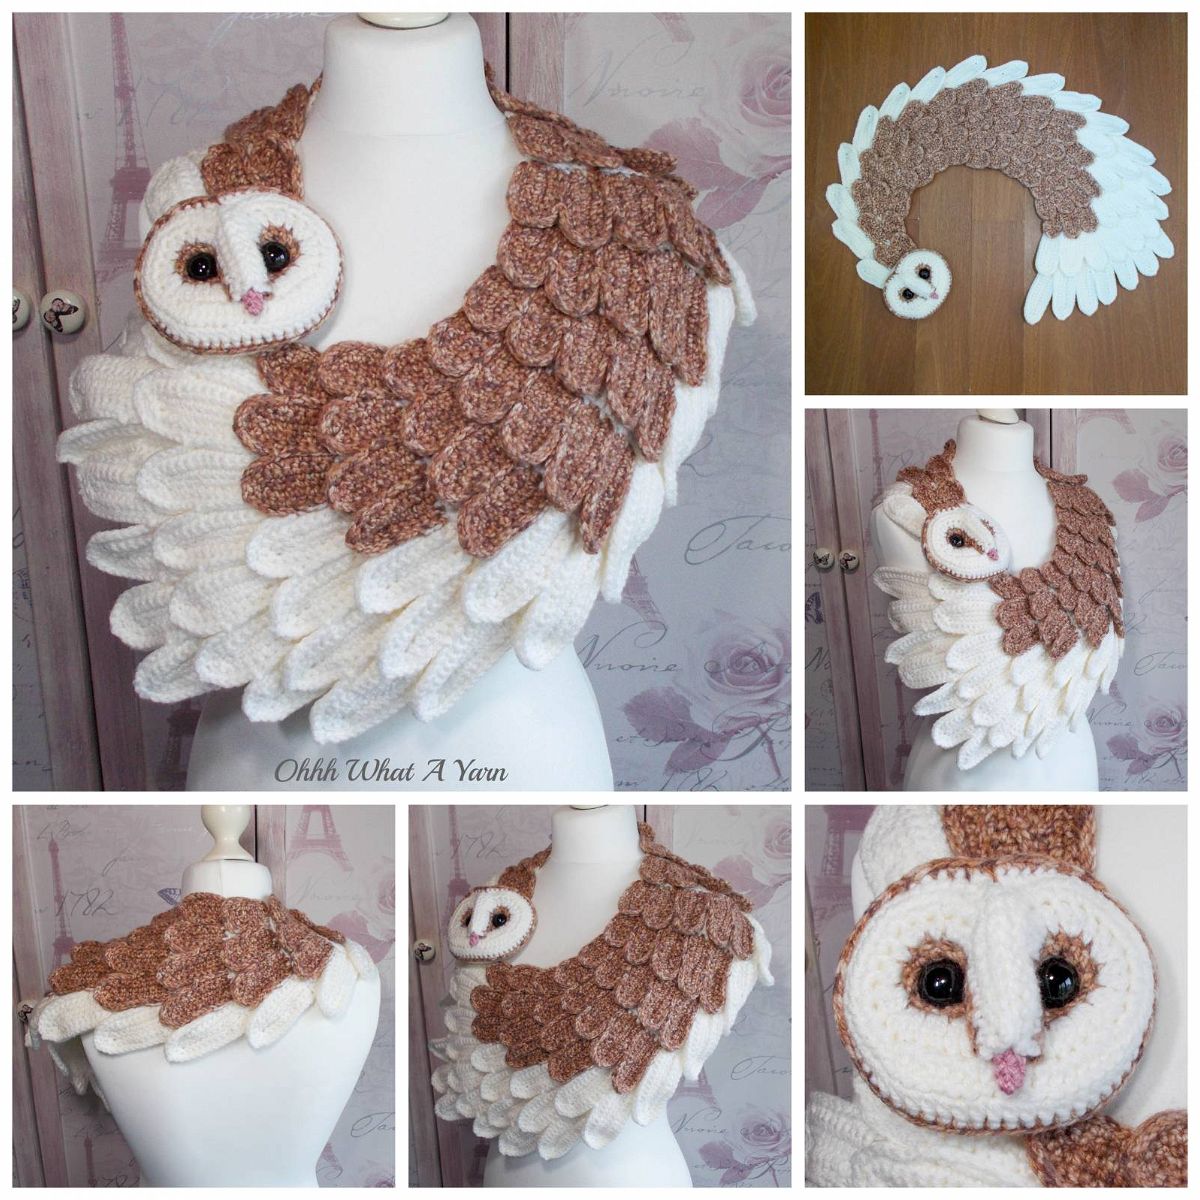 Amigurumi Crochet Owl Shawl Pattern Review by Ohhh What a Yarn for Cottontail & Whiskers